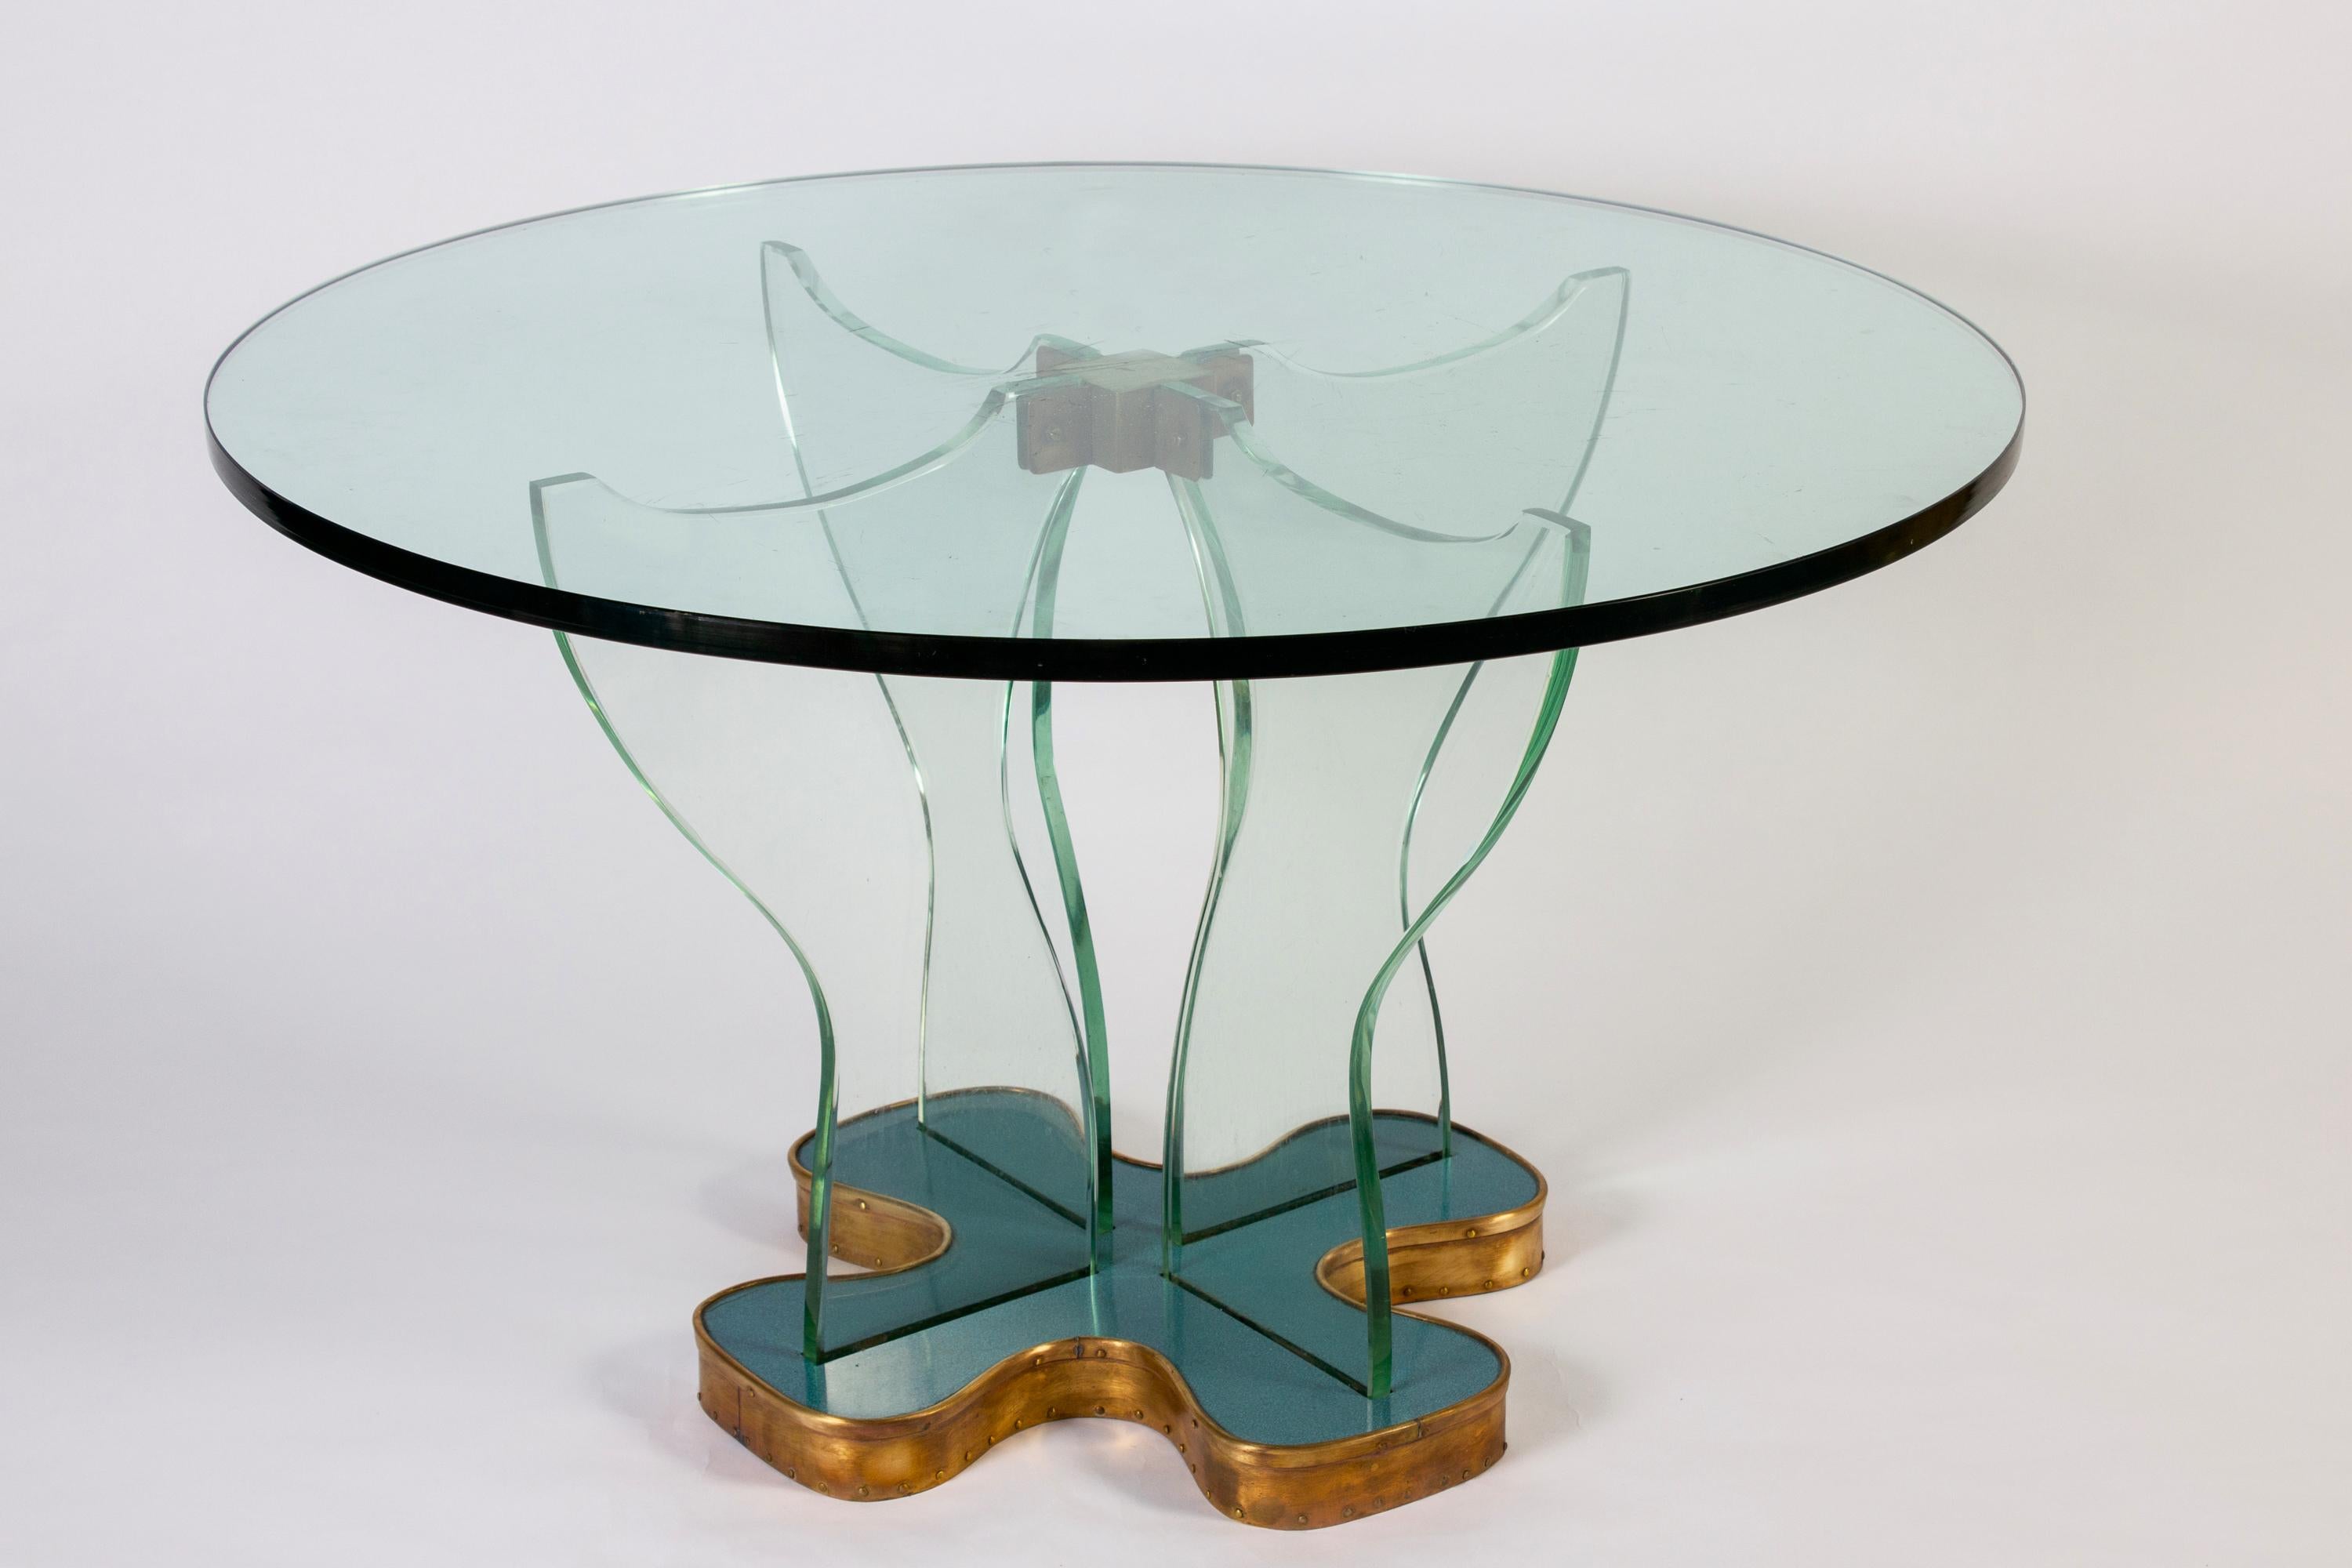 Round Glass Center or Caffe Table Attr. to Fontana Arte, Italy, 1940 For Sale 6